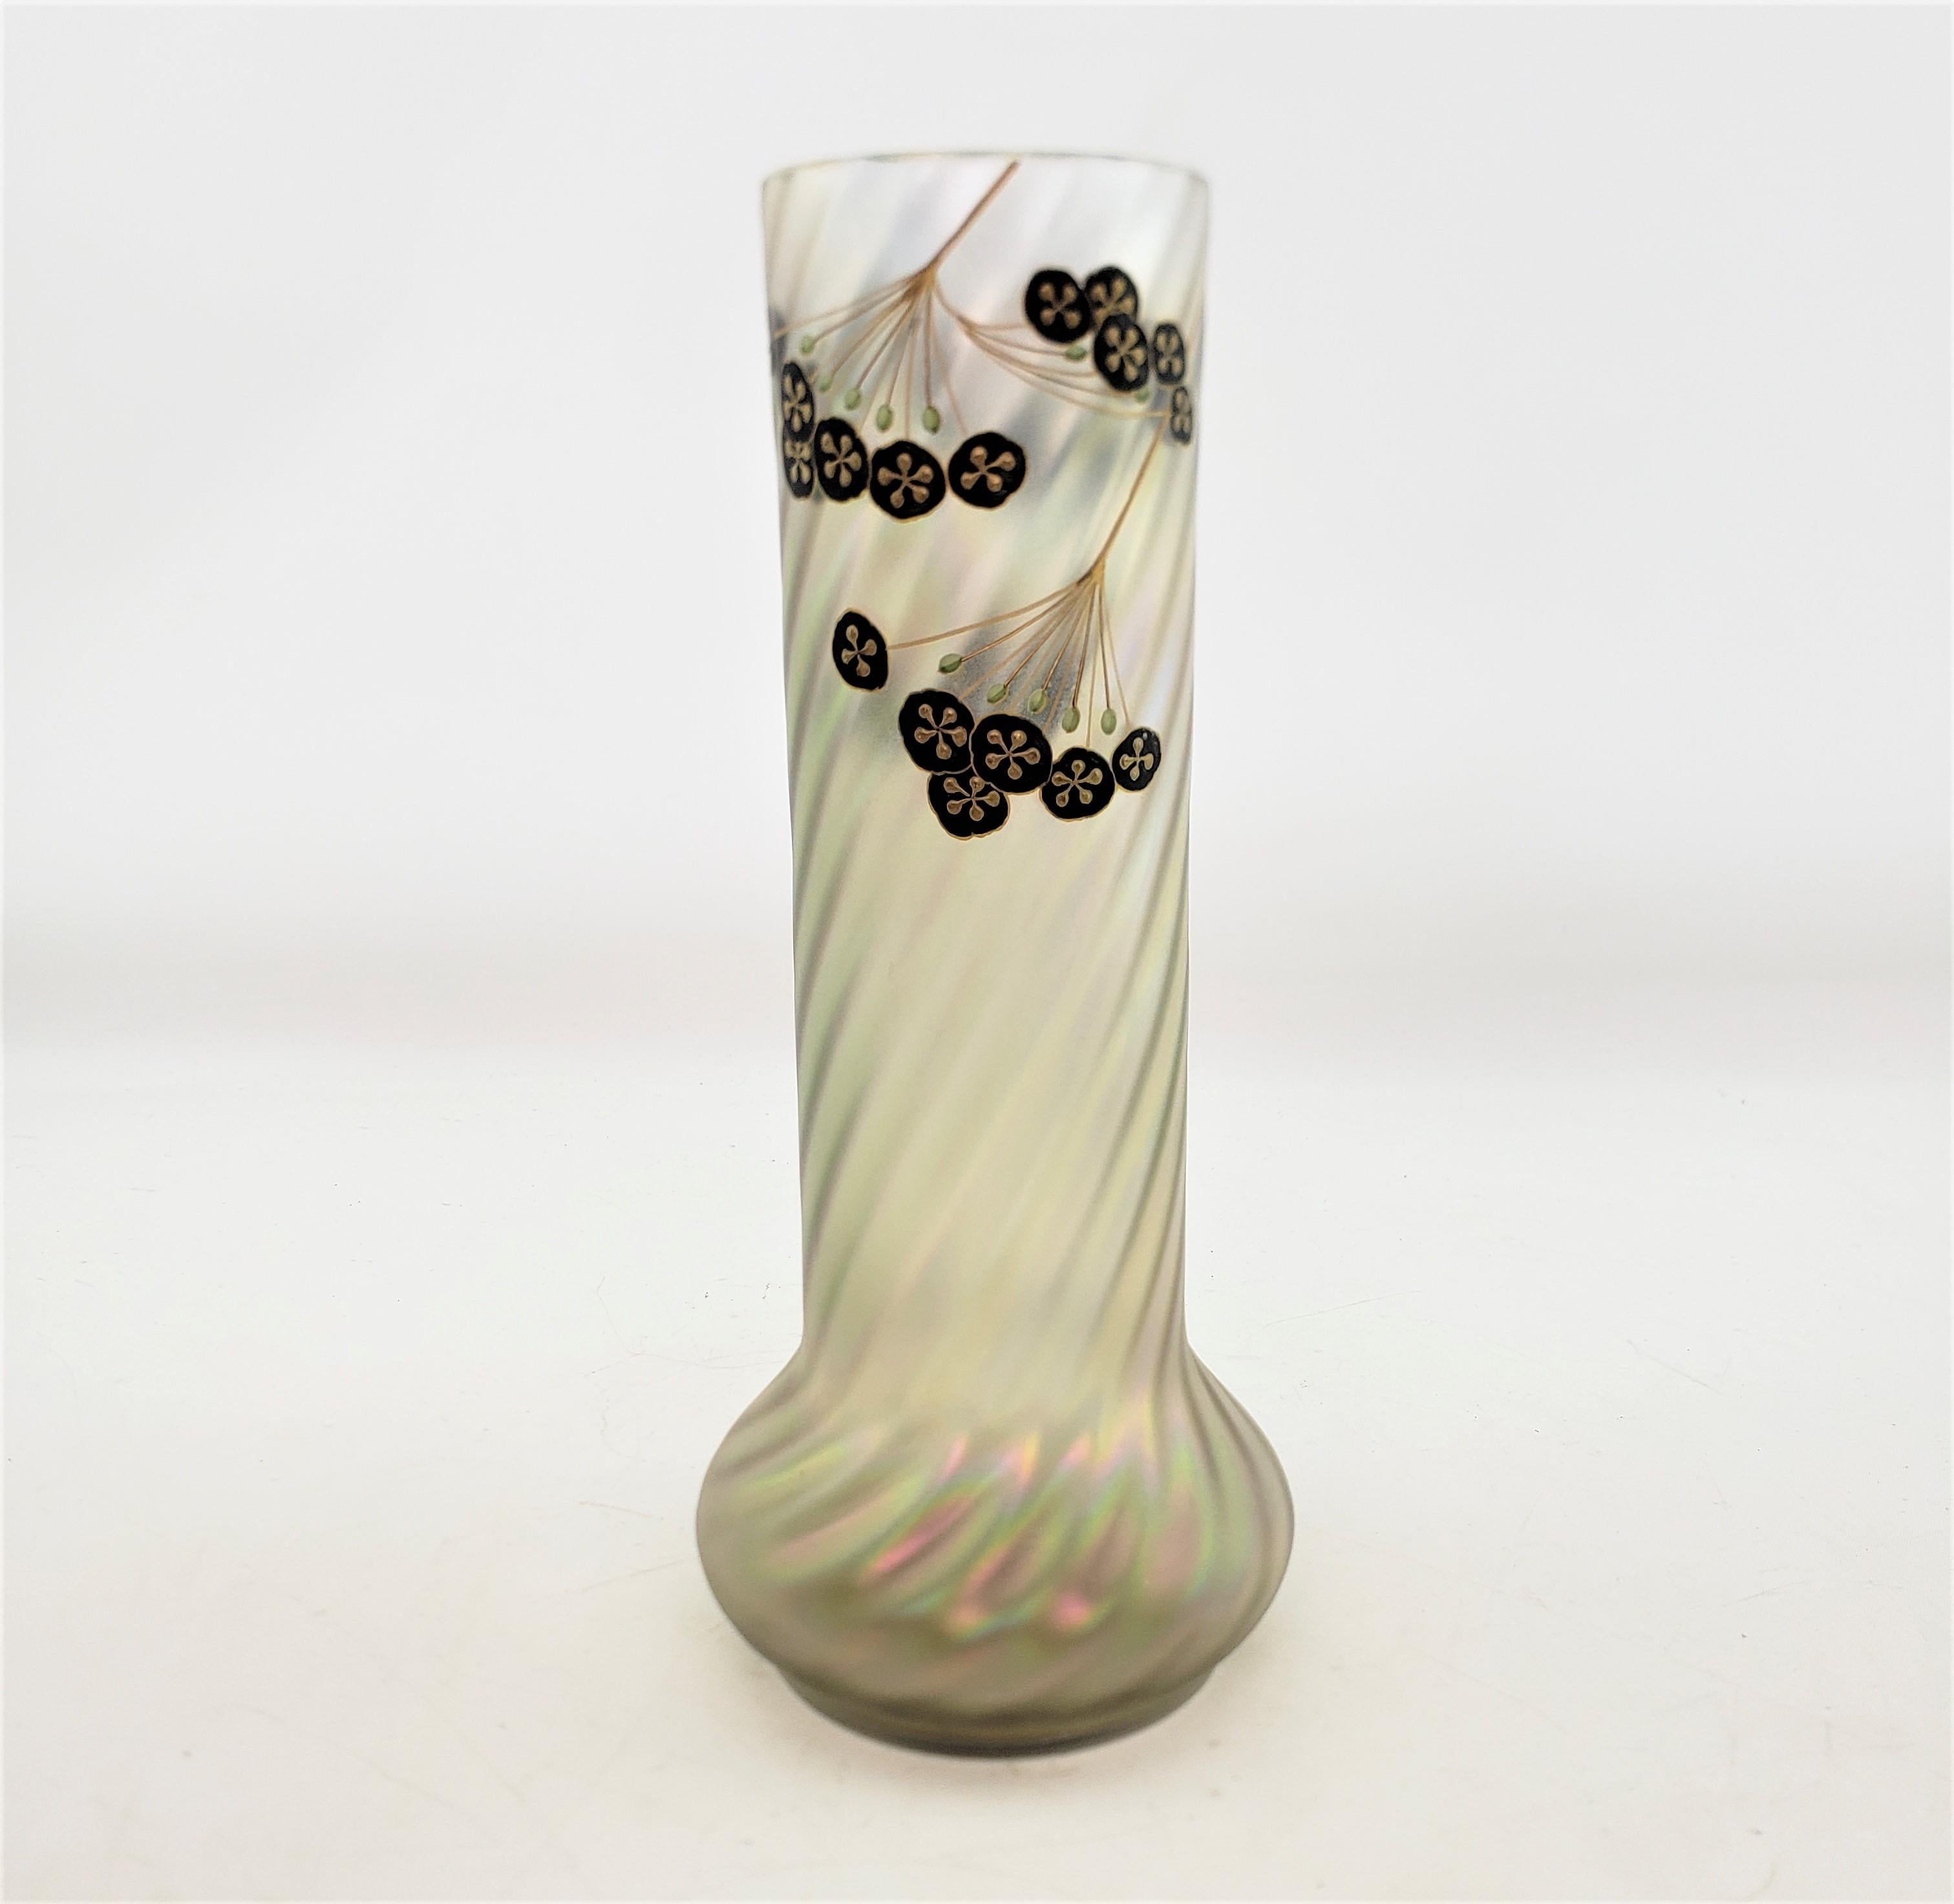 This antique art glass vase is unsigned, but presumed to have originated from Austria and date to approximately 1900 and done in the period Art Nouveau style. The vase is done in an opaque swirled cream glass with an iridescent sheen with enamel